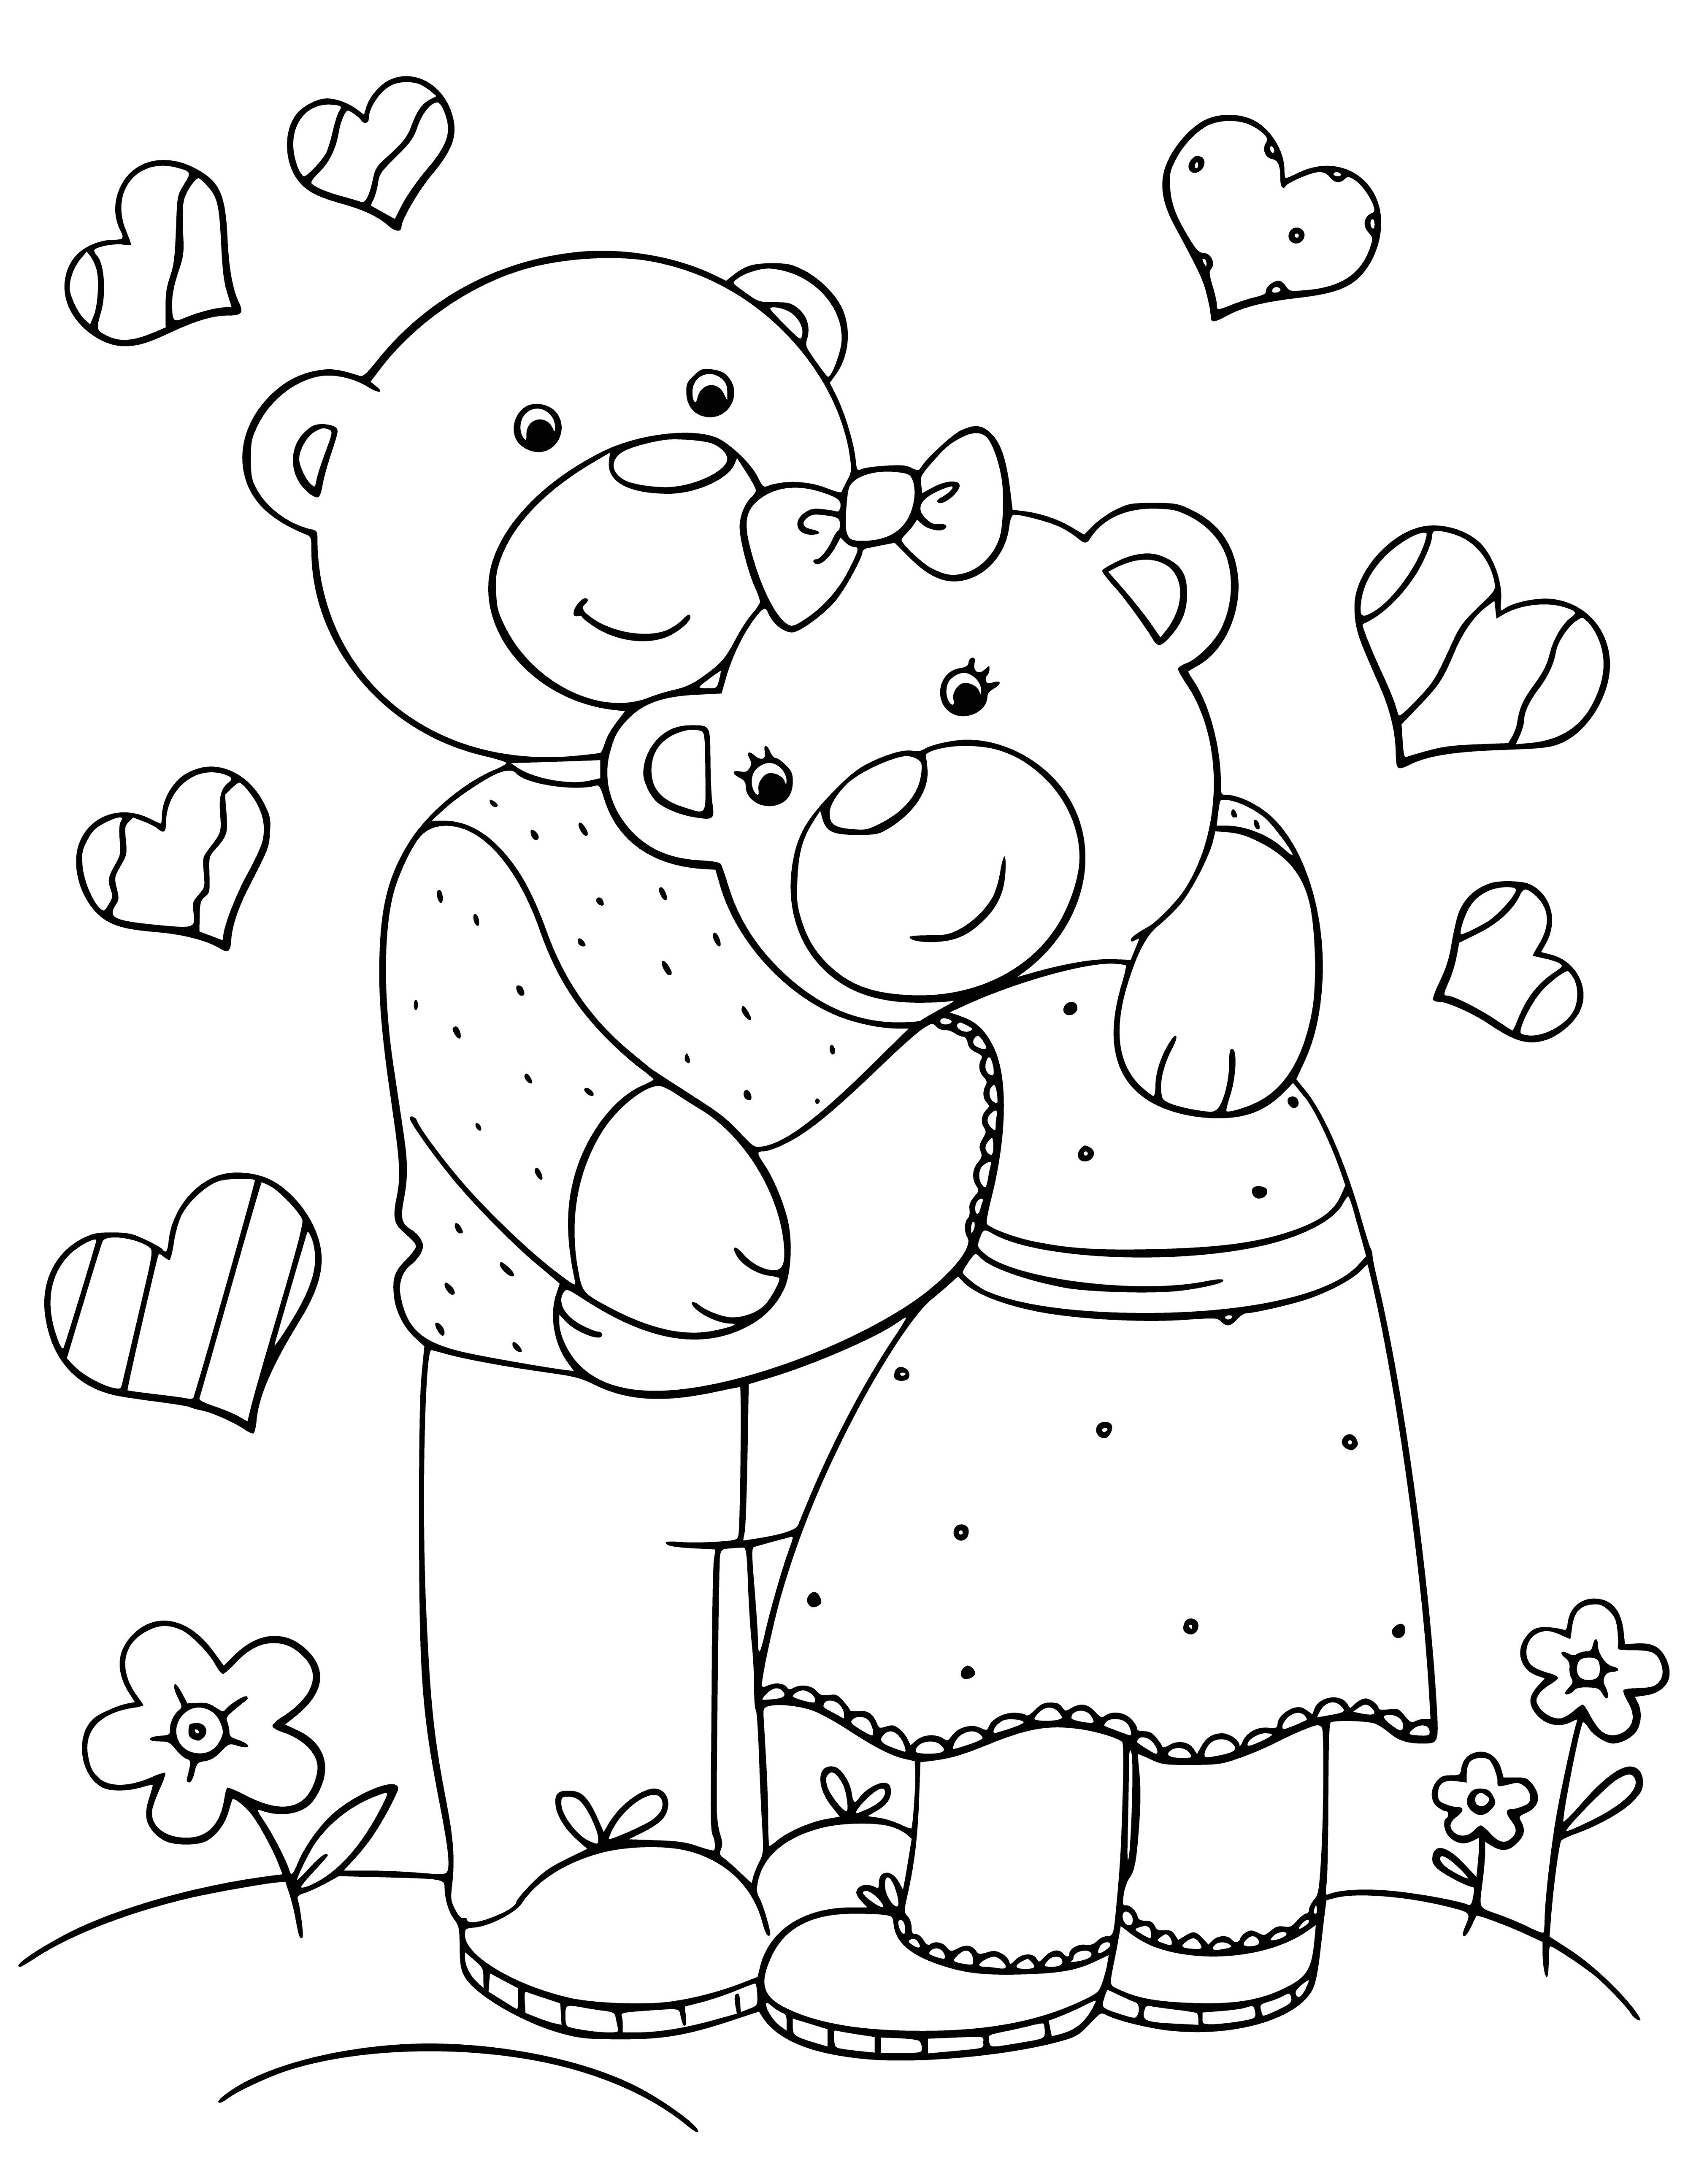 coloring page: Family of 4 bears celebrate Valentine's Day; adults at table; children playing with a toy. #ValentinesDay #BearFamily